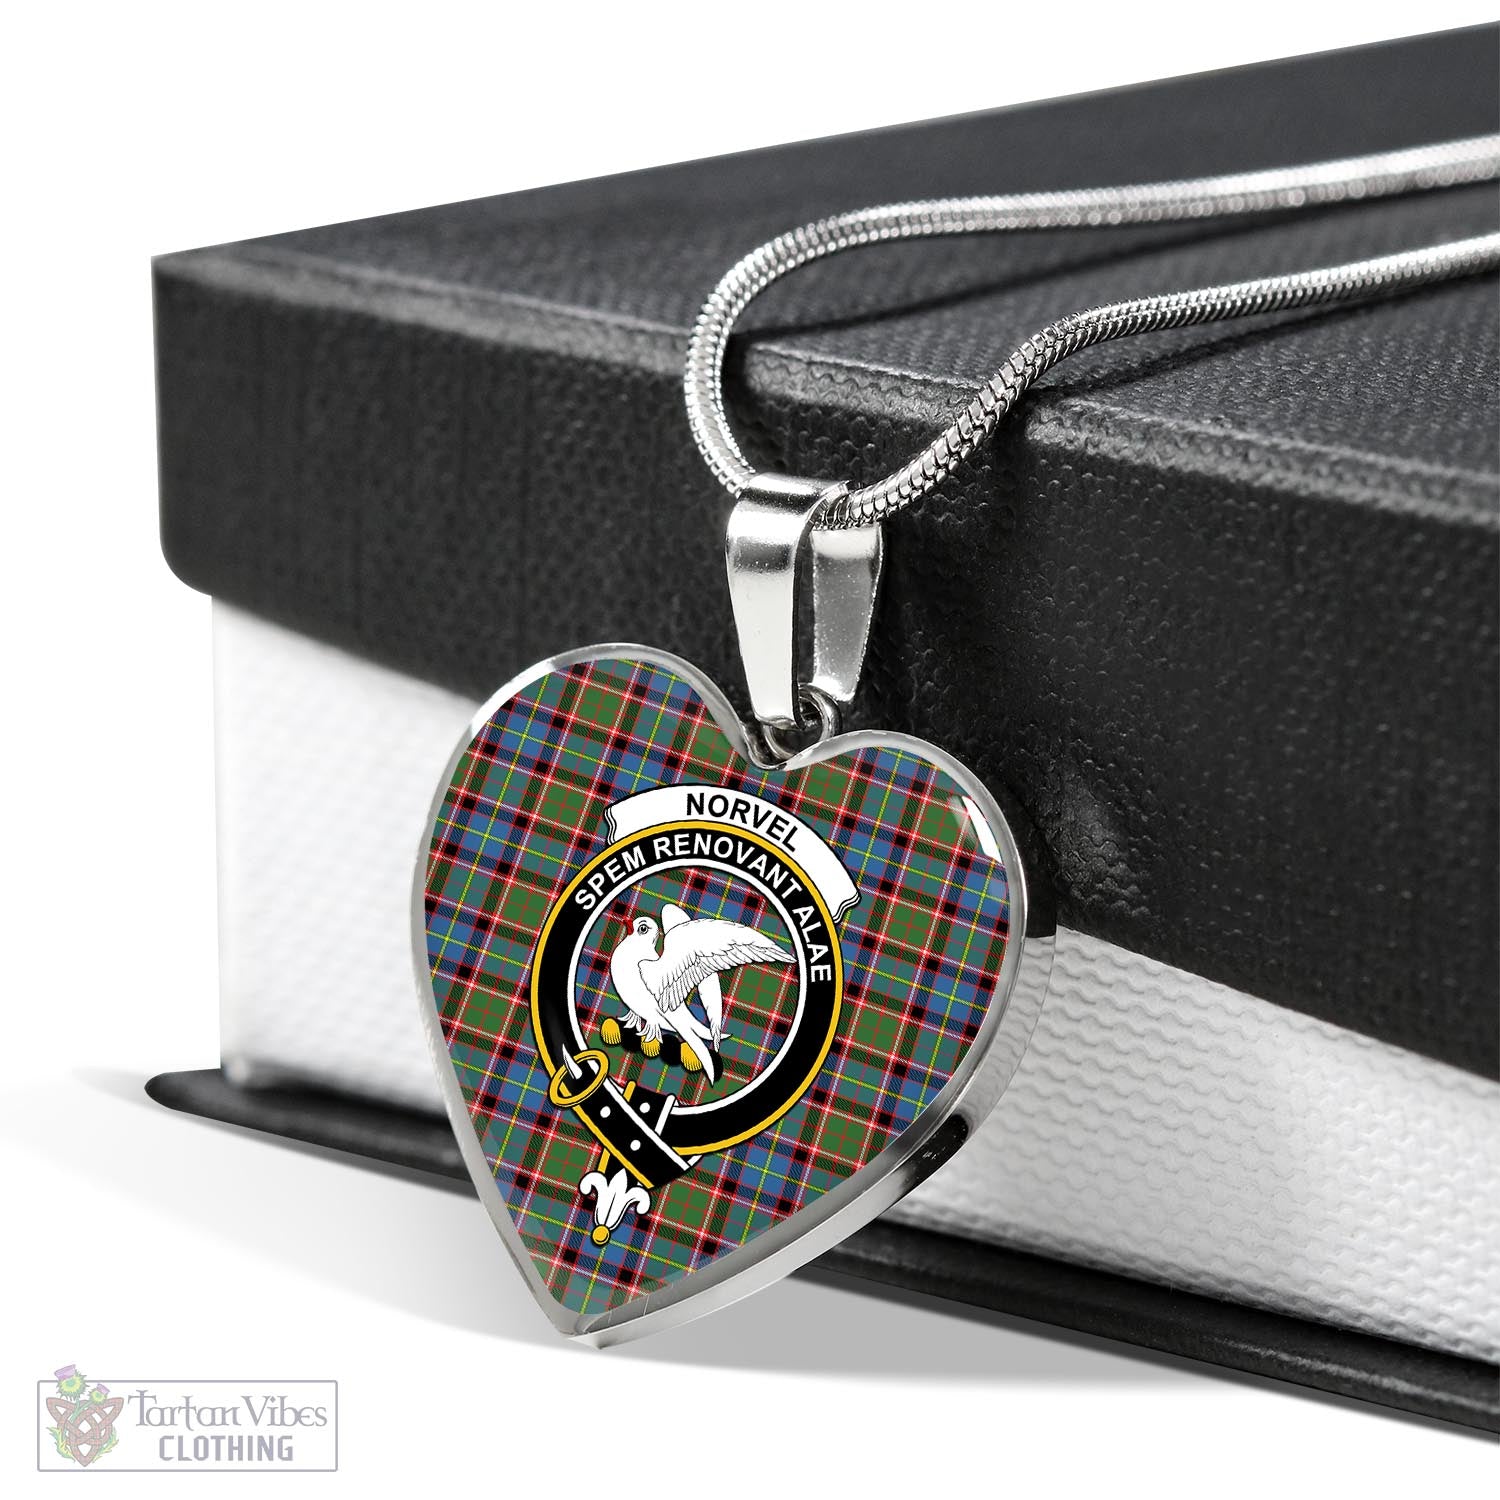 Tartan Vibes Clothing Norvel Tartan Heart Necklace with Family Crest